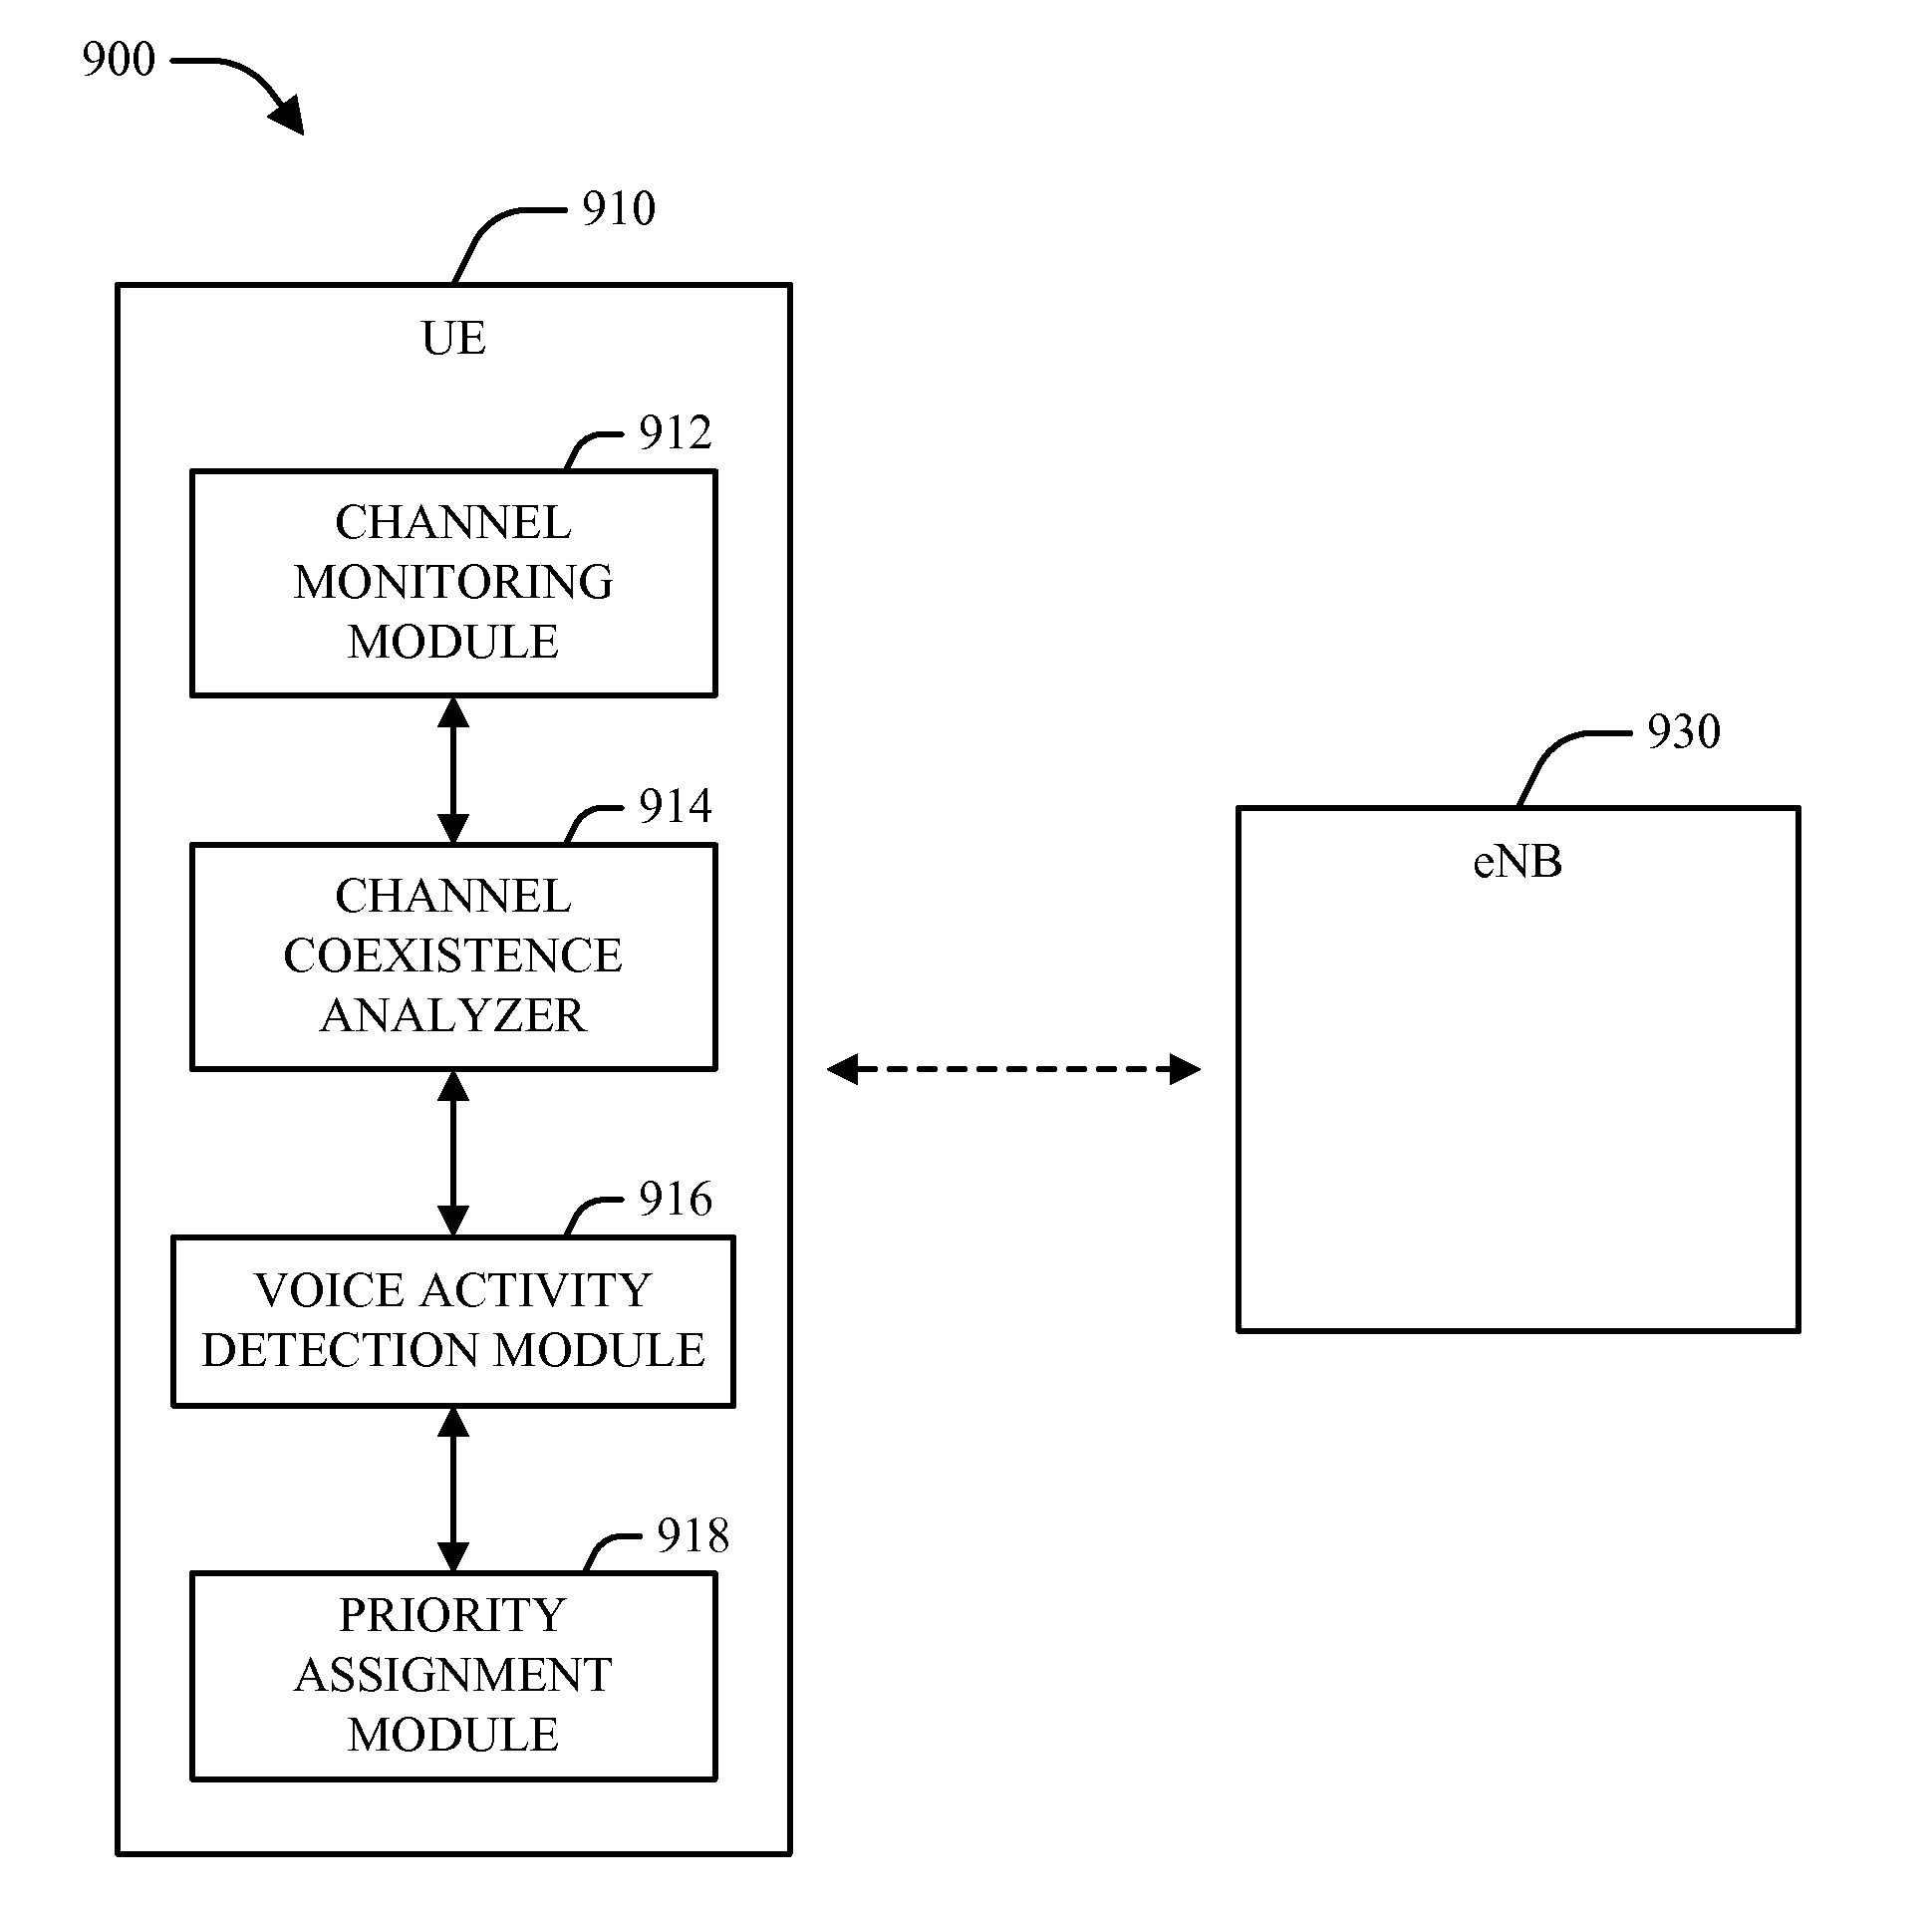 Method and apparatus to facilitate voice activity detection and coexistence manager decisions